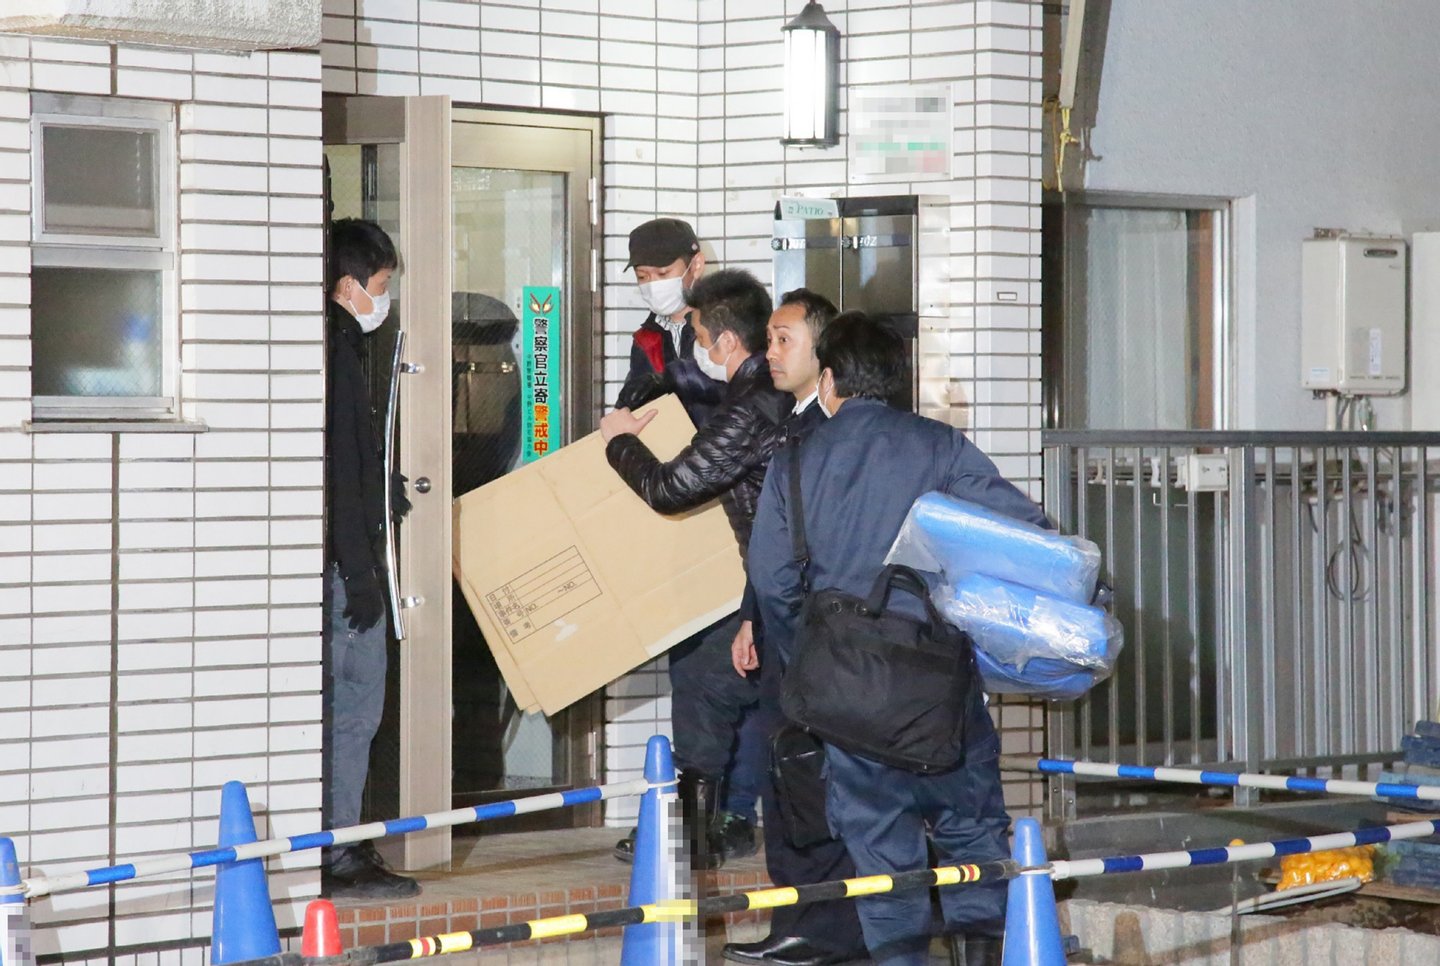 Police investigators enter an the apartment of the suspect believed to be lived with a girl in Tokyo on March 28, 2016. A Japanese girl who vanished two years ago has returned home after escaping from the apartment of the university student who had held her captive, police and local media said March 28. / AFP / JIJI PRESS / JIJI PRESS (Photo credit should read JIJI PRESS/AFP/Getty Images)